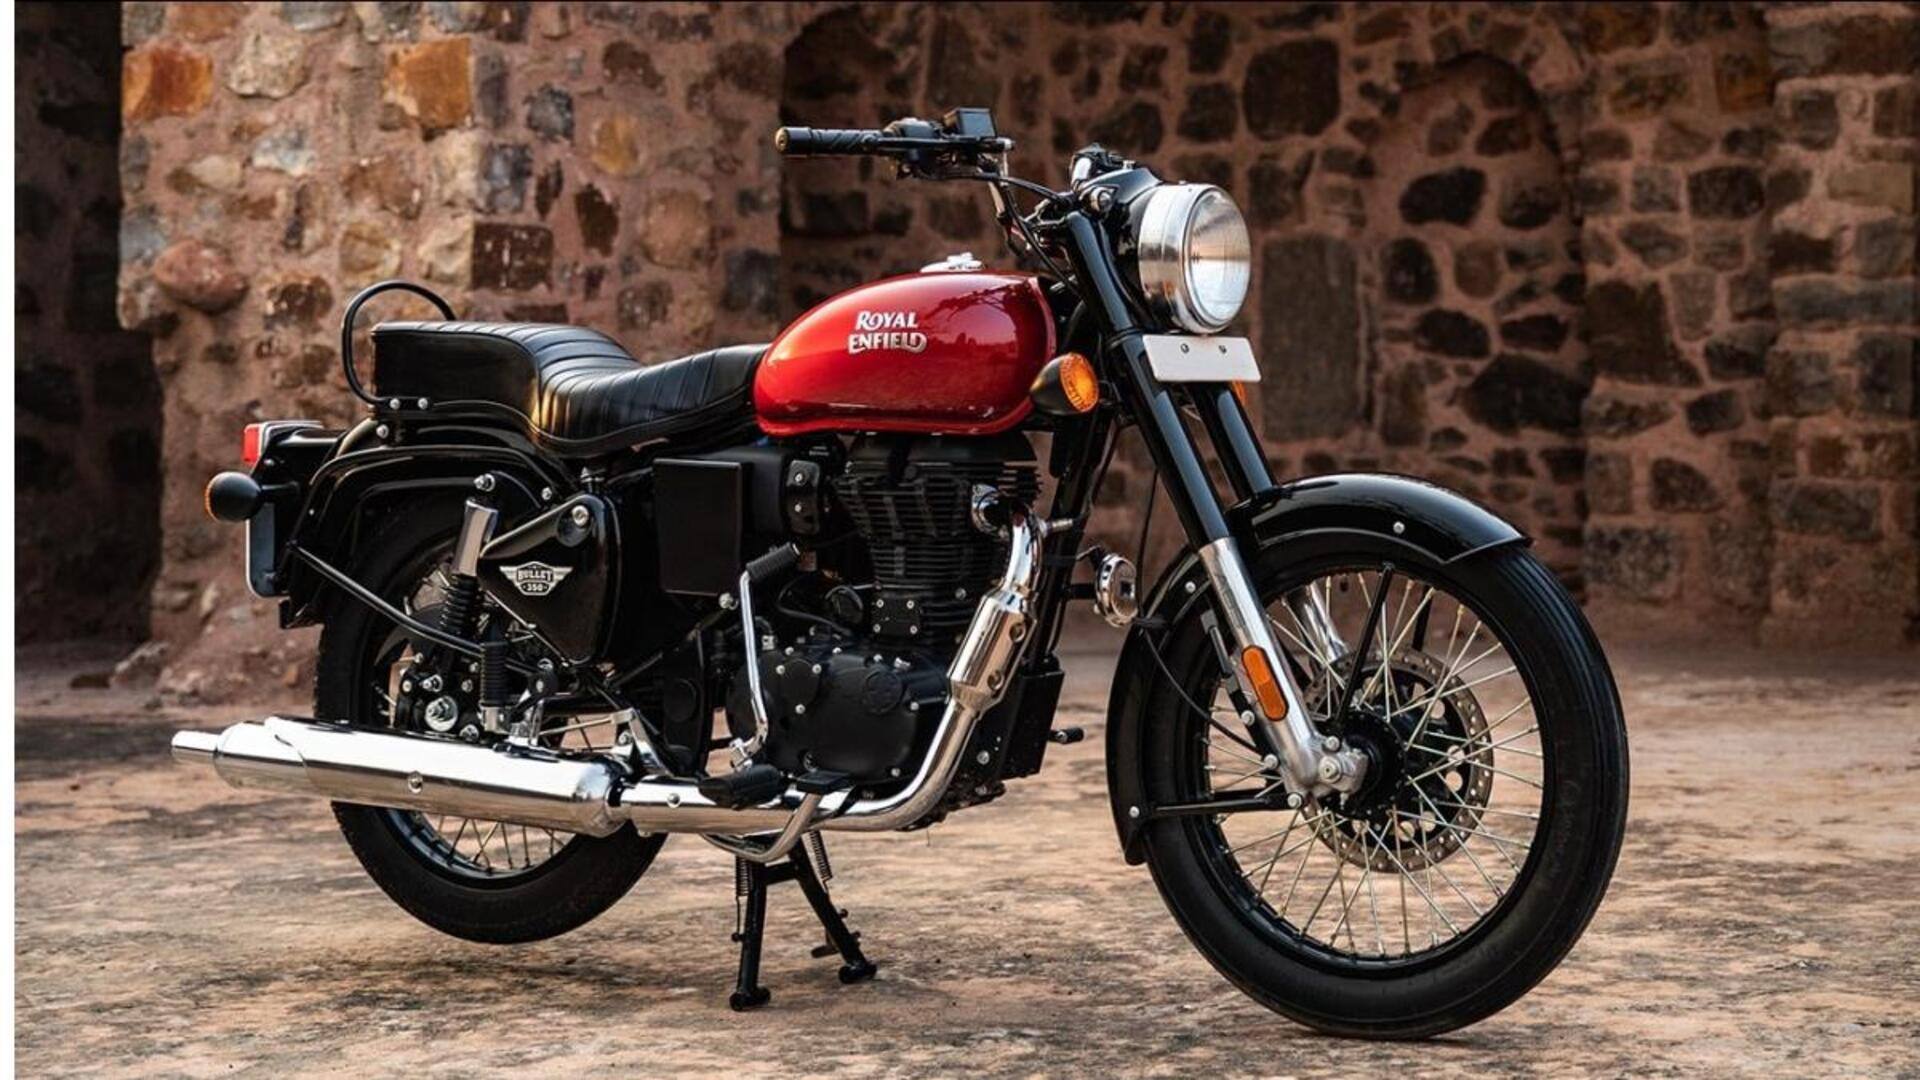 Why Morgan Stanley has downgraded Eicher Motors's share